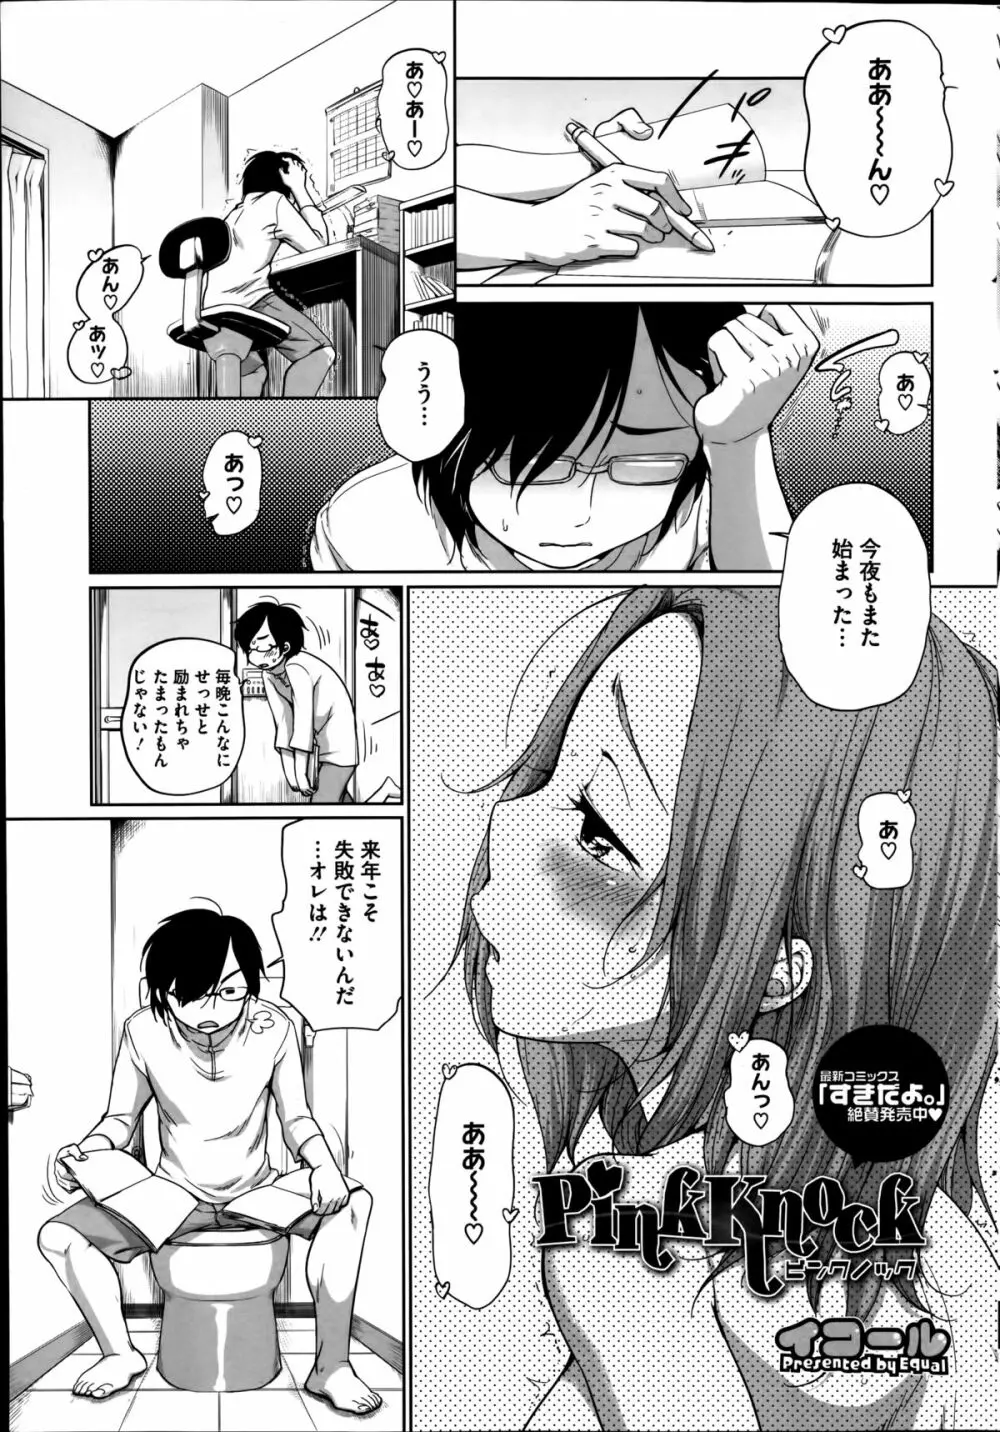 PinkKnock 第1-3章 Page.1